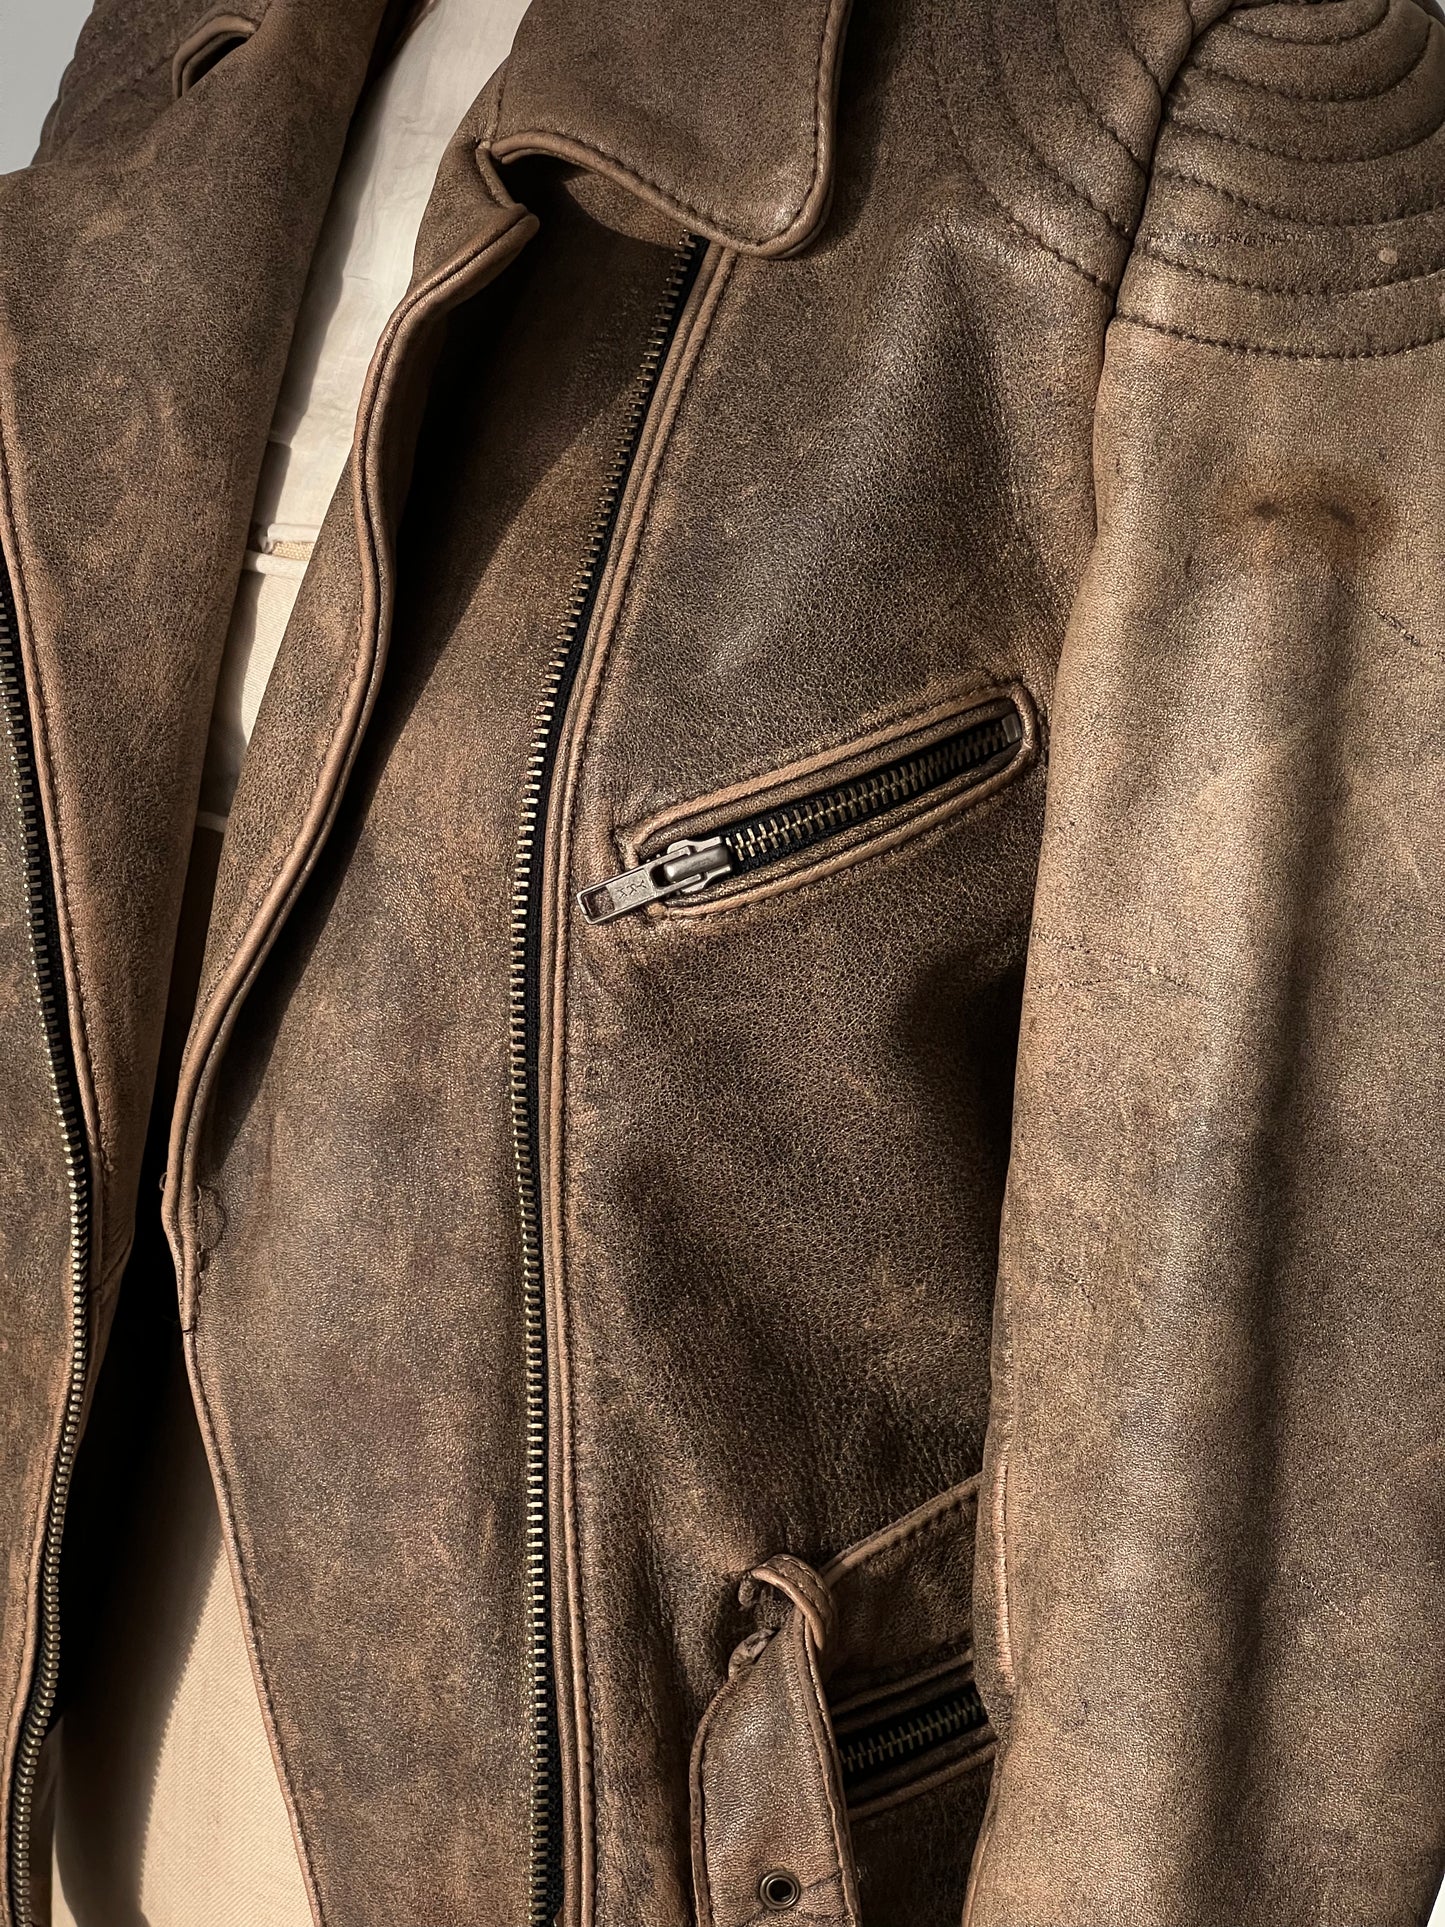 brown woman’s leather jacket pocket